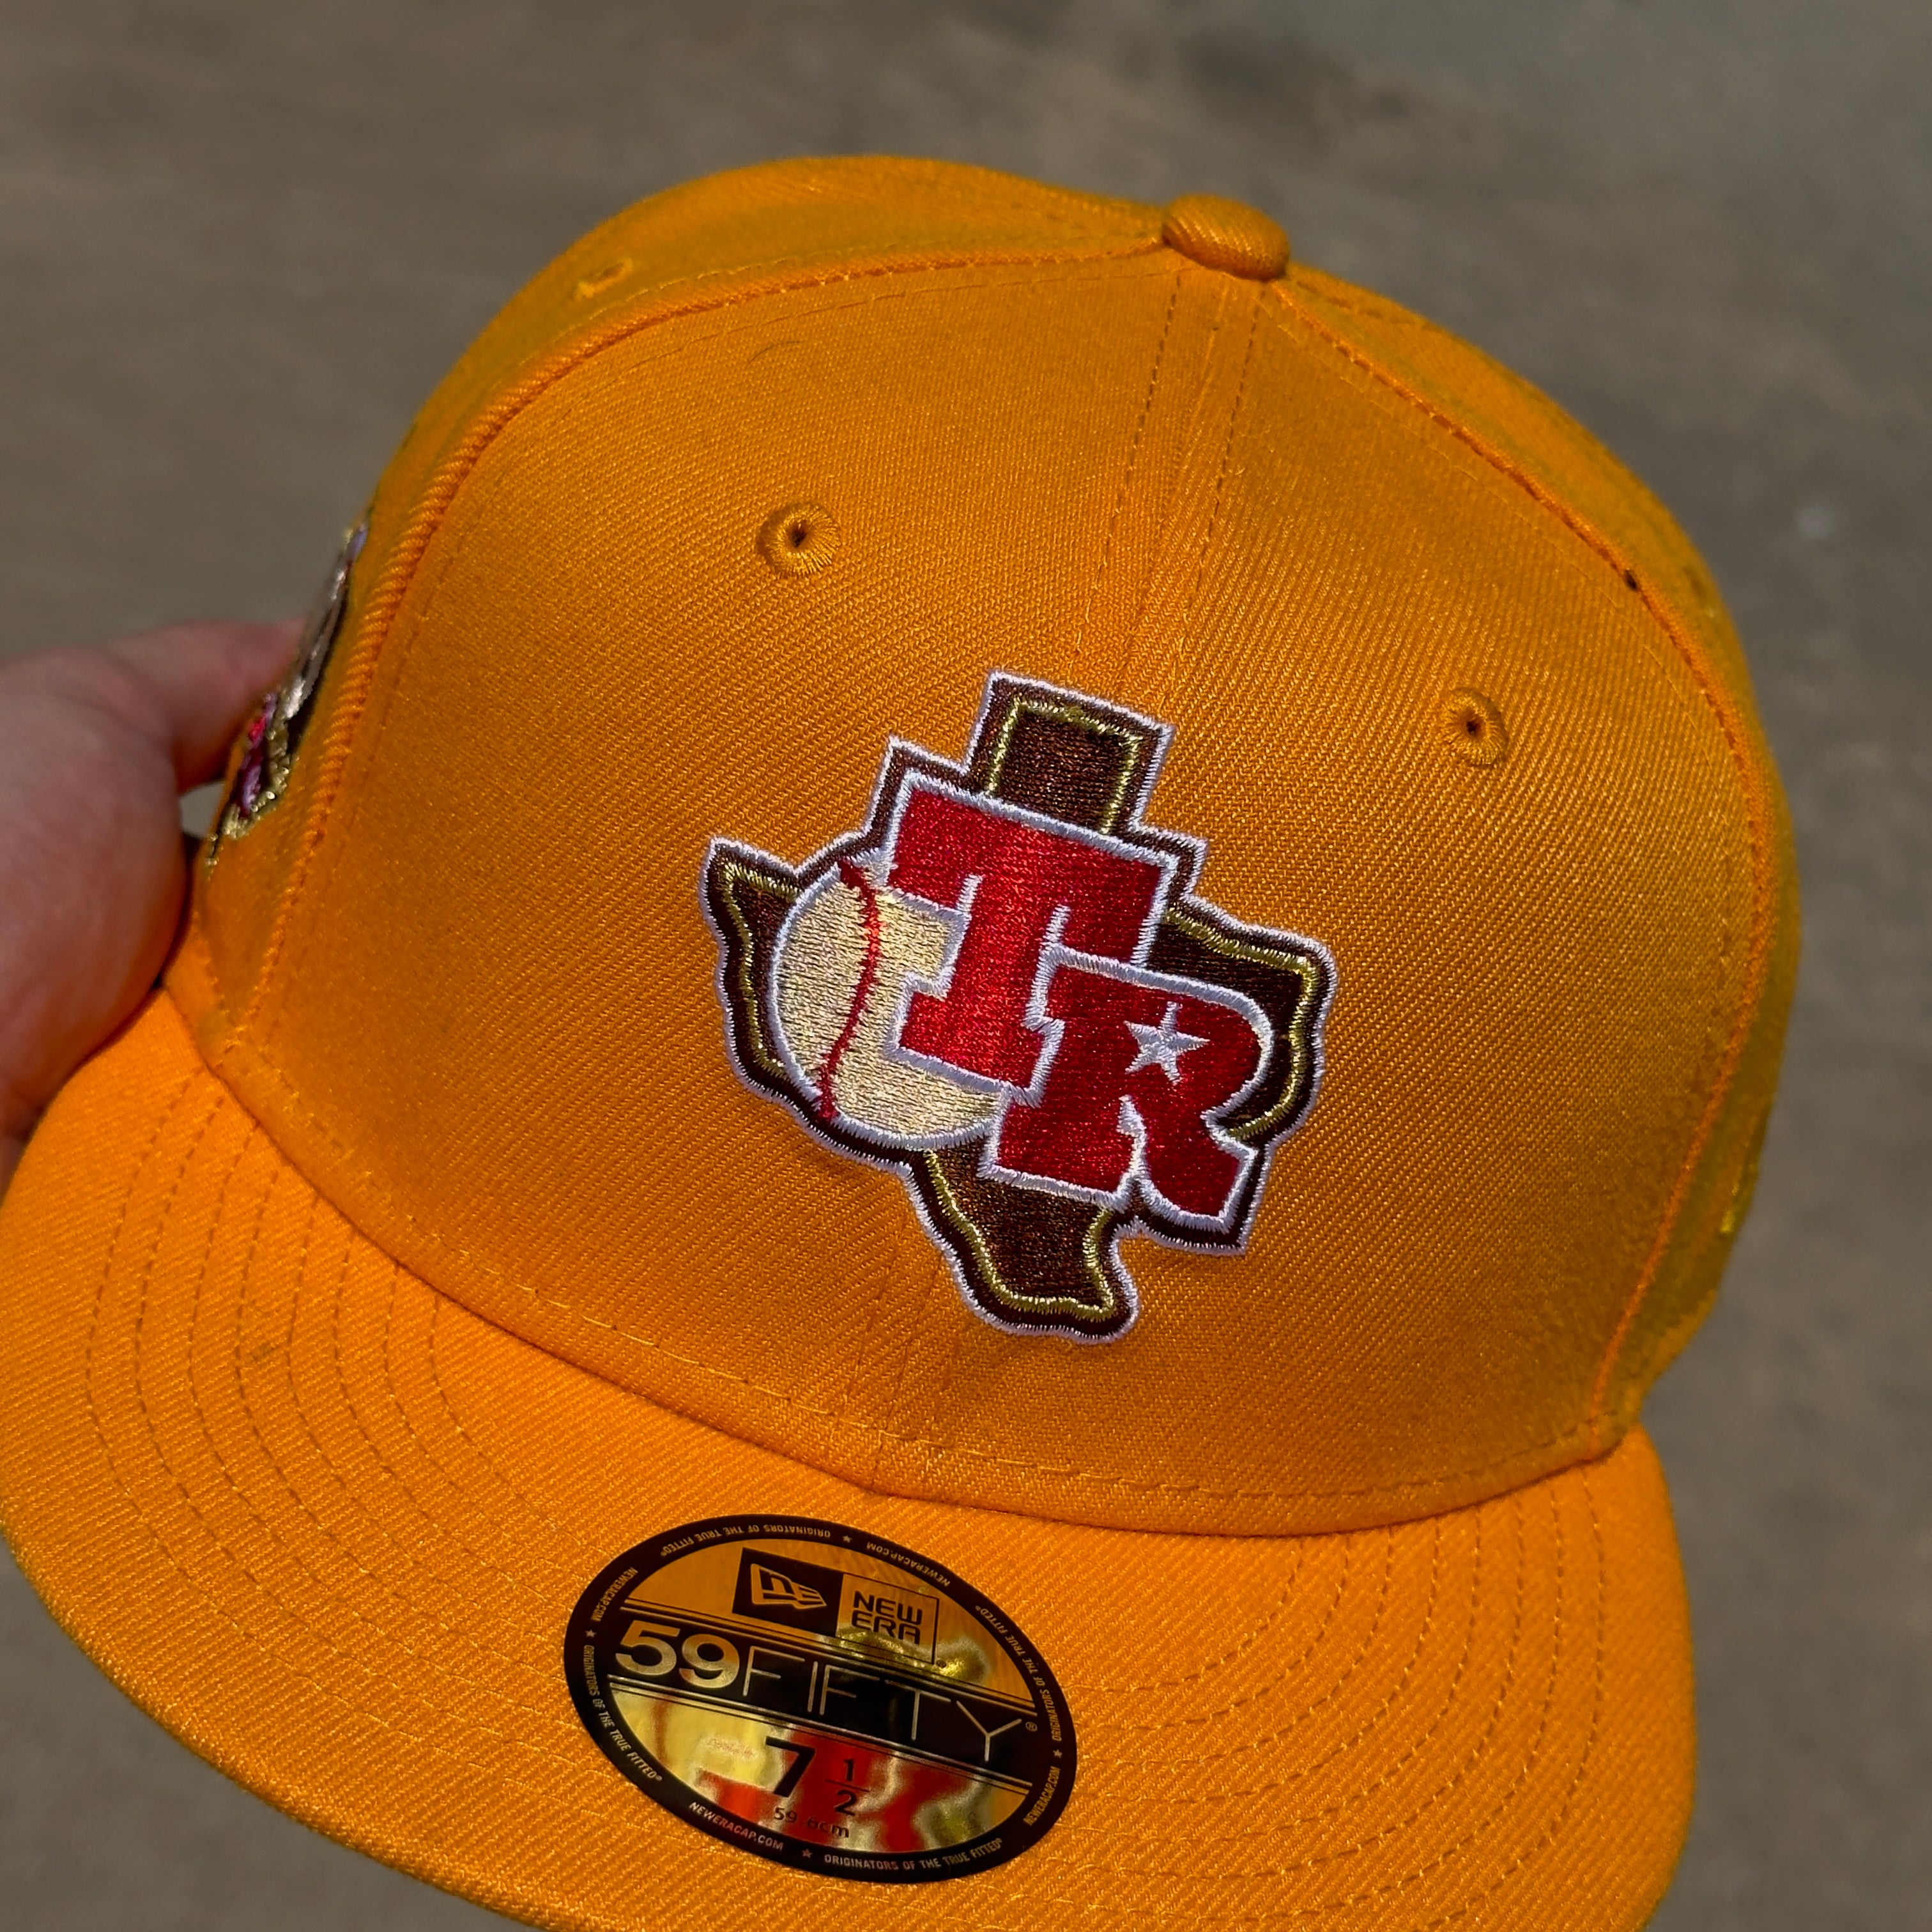 1/2 NEW Yellow Dallas Texas Rangers 40th Anniversary Hatclub 59fifty New Era Fitted Hat Cap